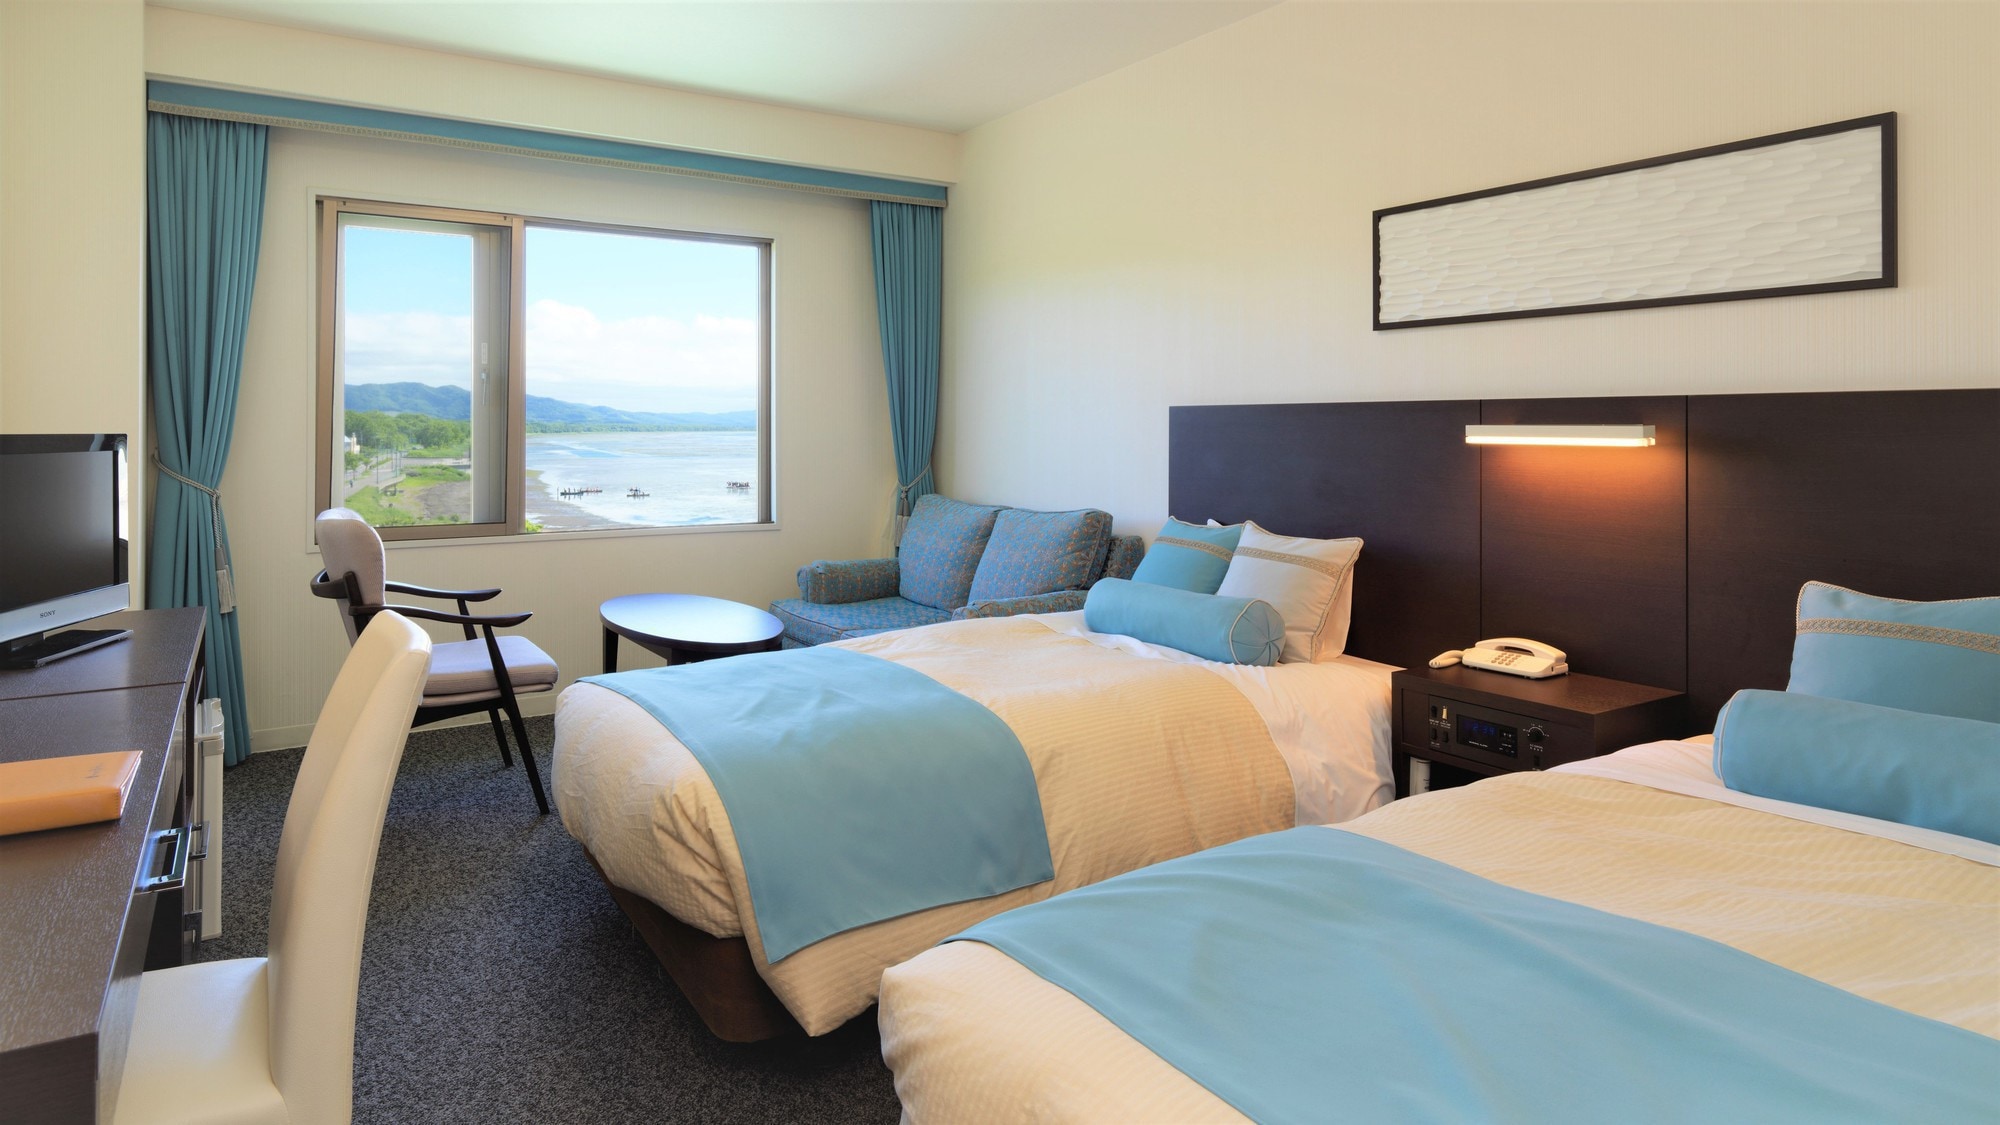 [Lake diagonal] Twin room / You can see the lake diagonally from the window (example of guest room)